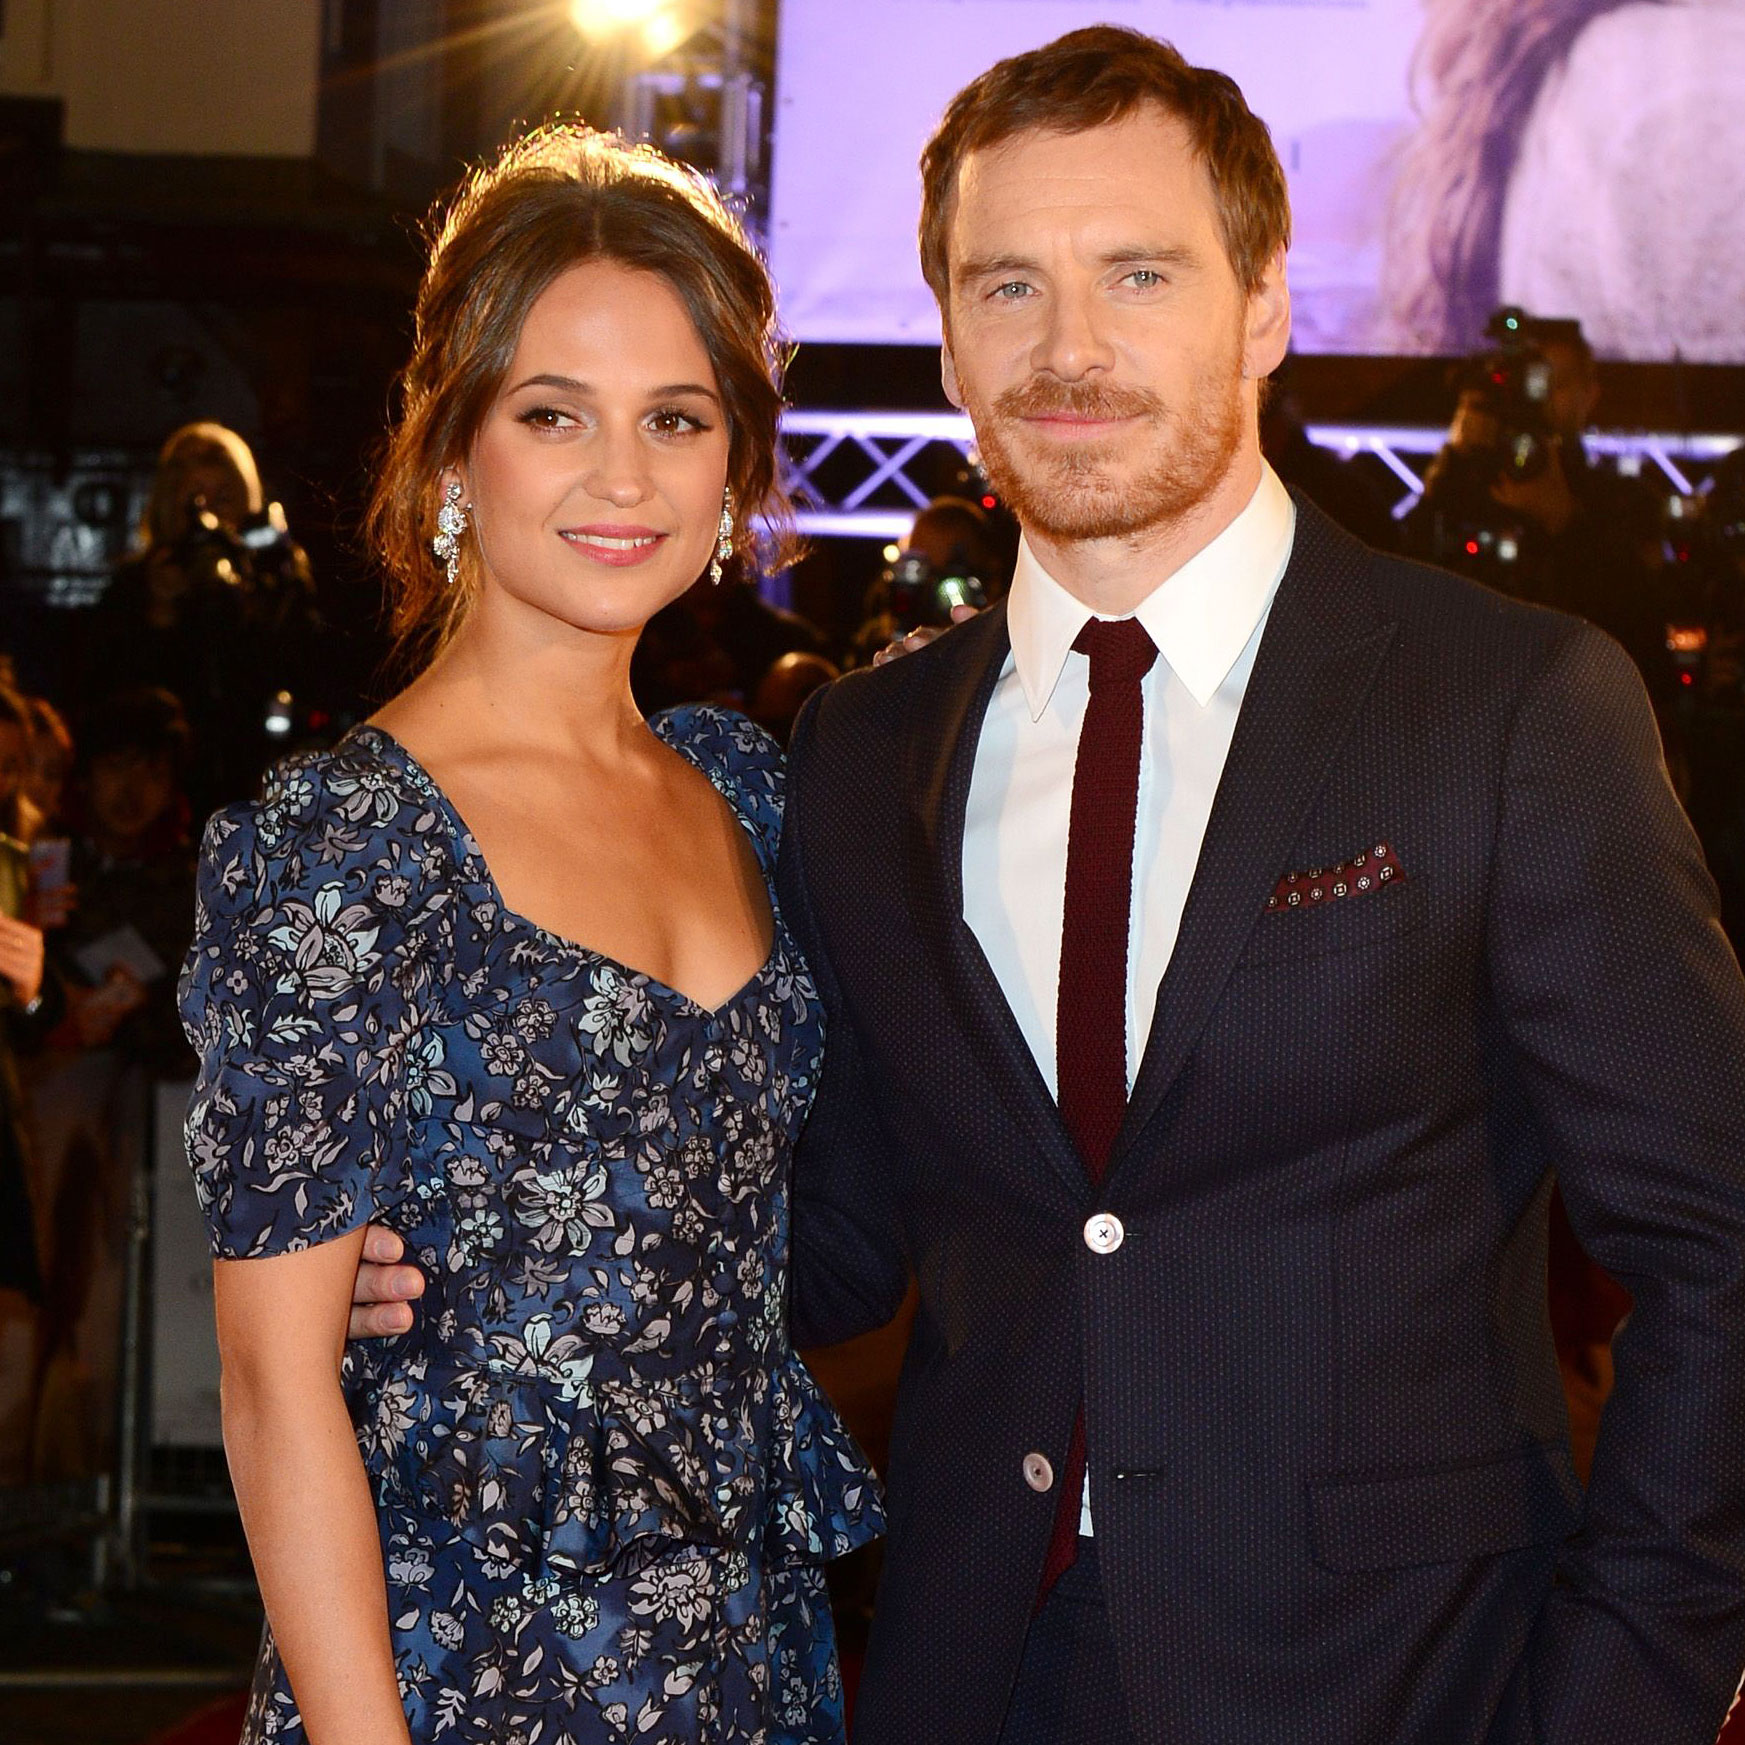 Alicia Vikander and Micheal Fassbender's relationship.